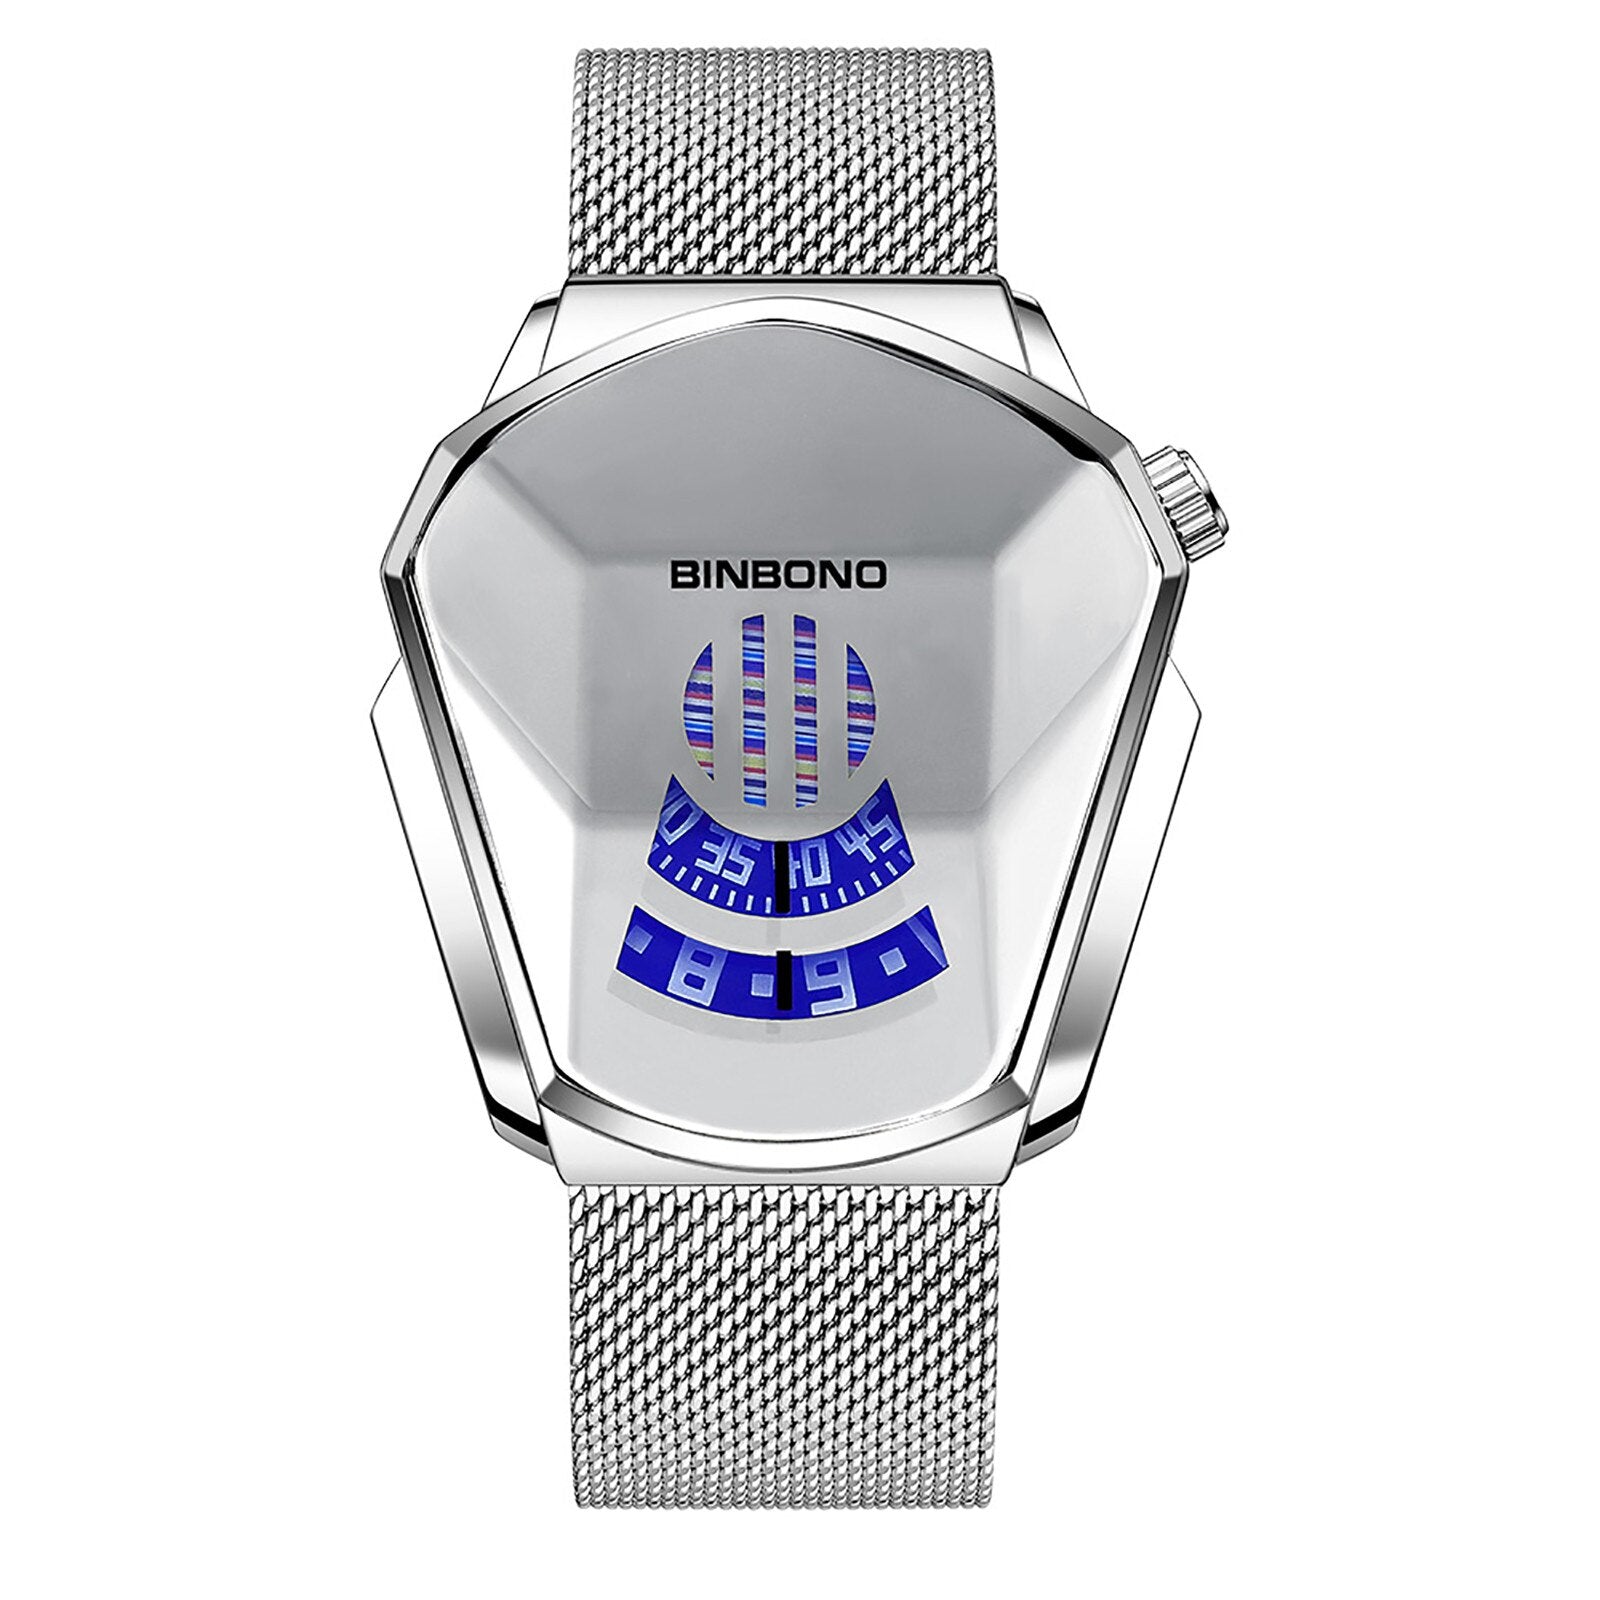 New Hot Diamond Style Quartz Watch - 200034143 A / United States Find Epic Store